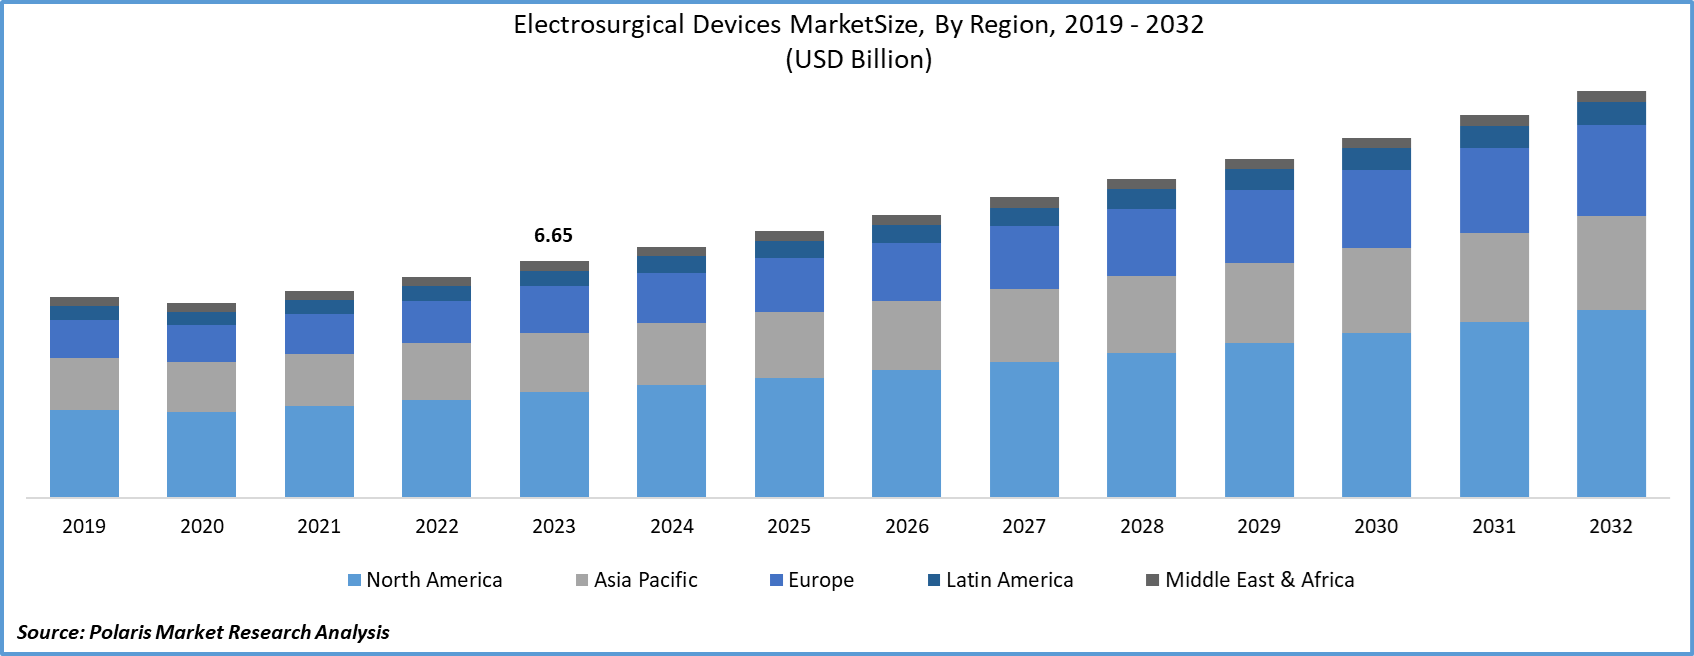 Electrosurgical Devices Market Size